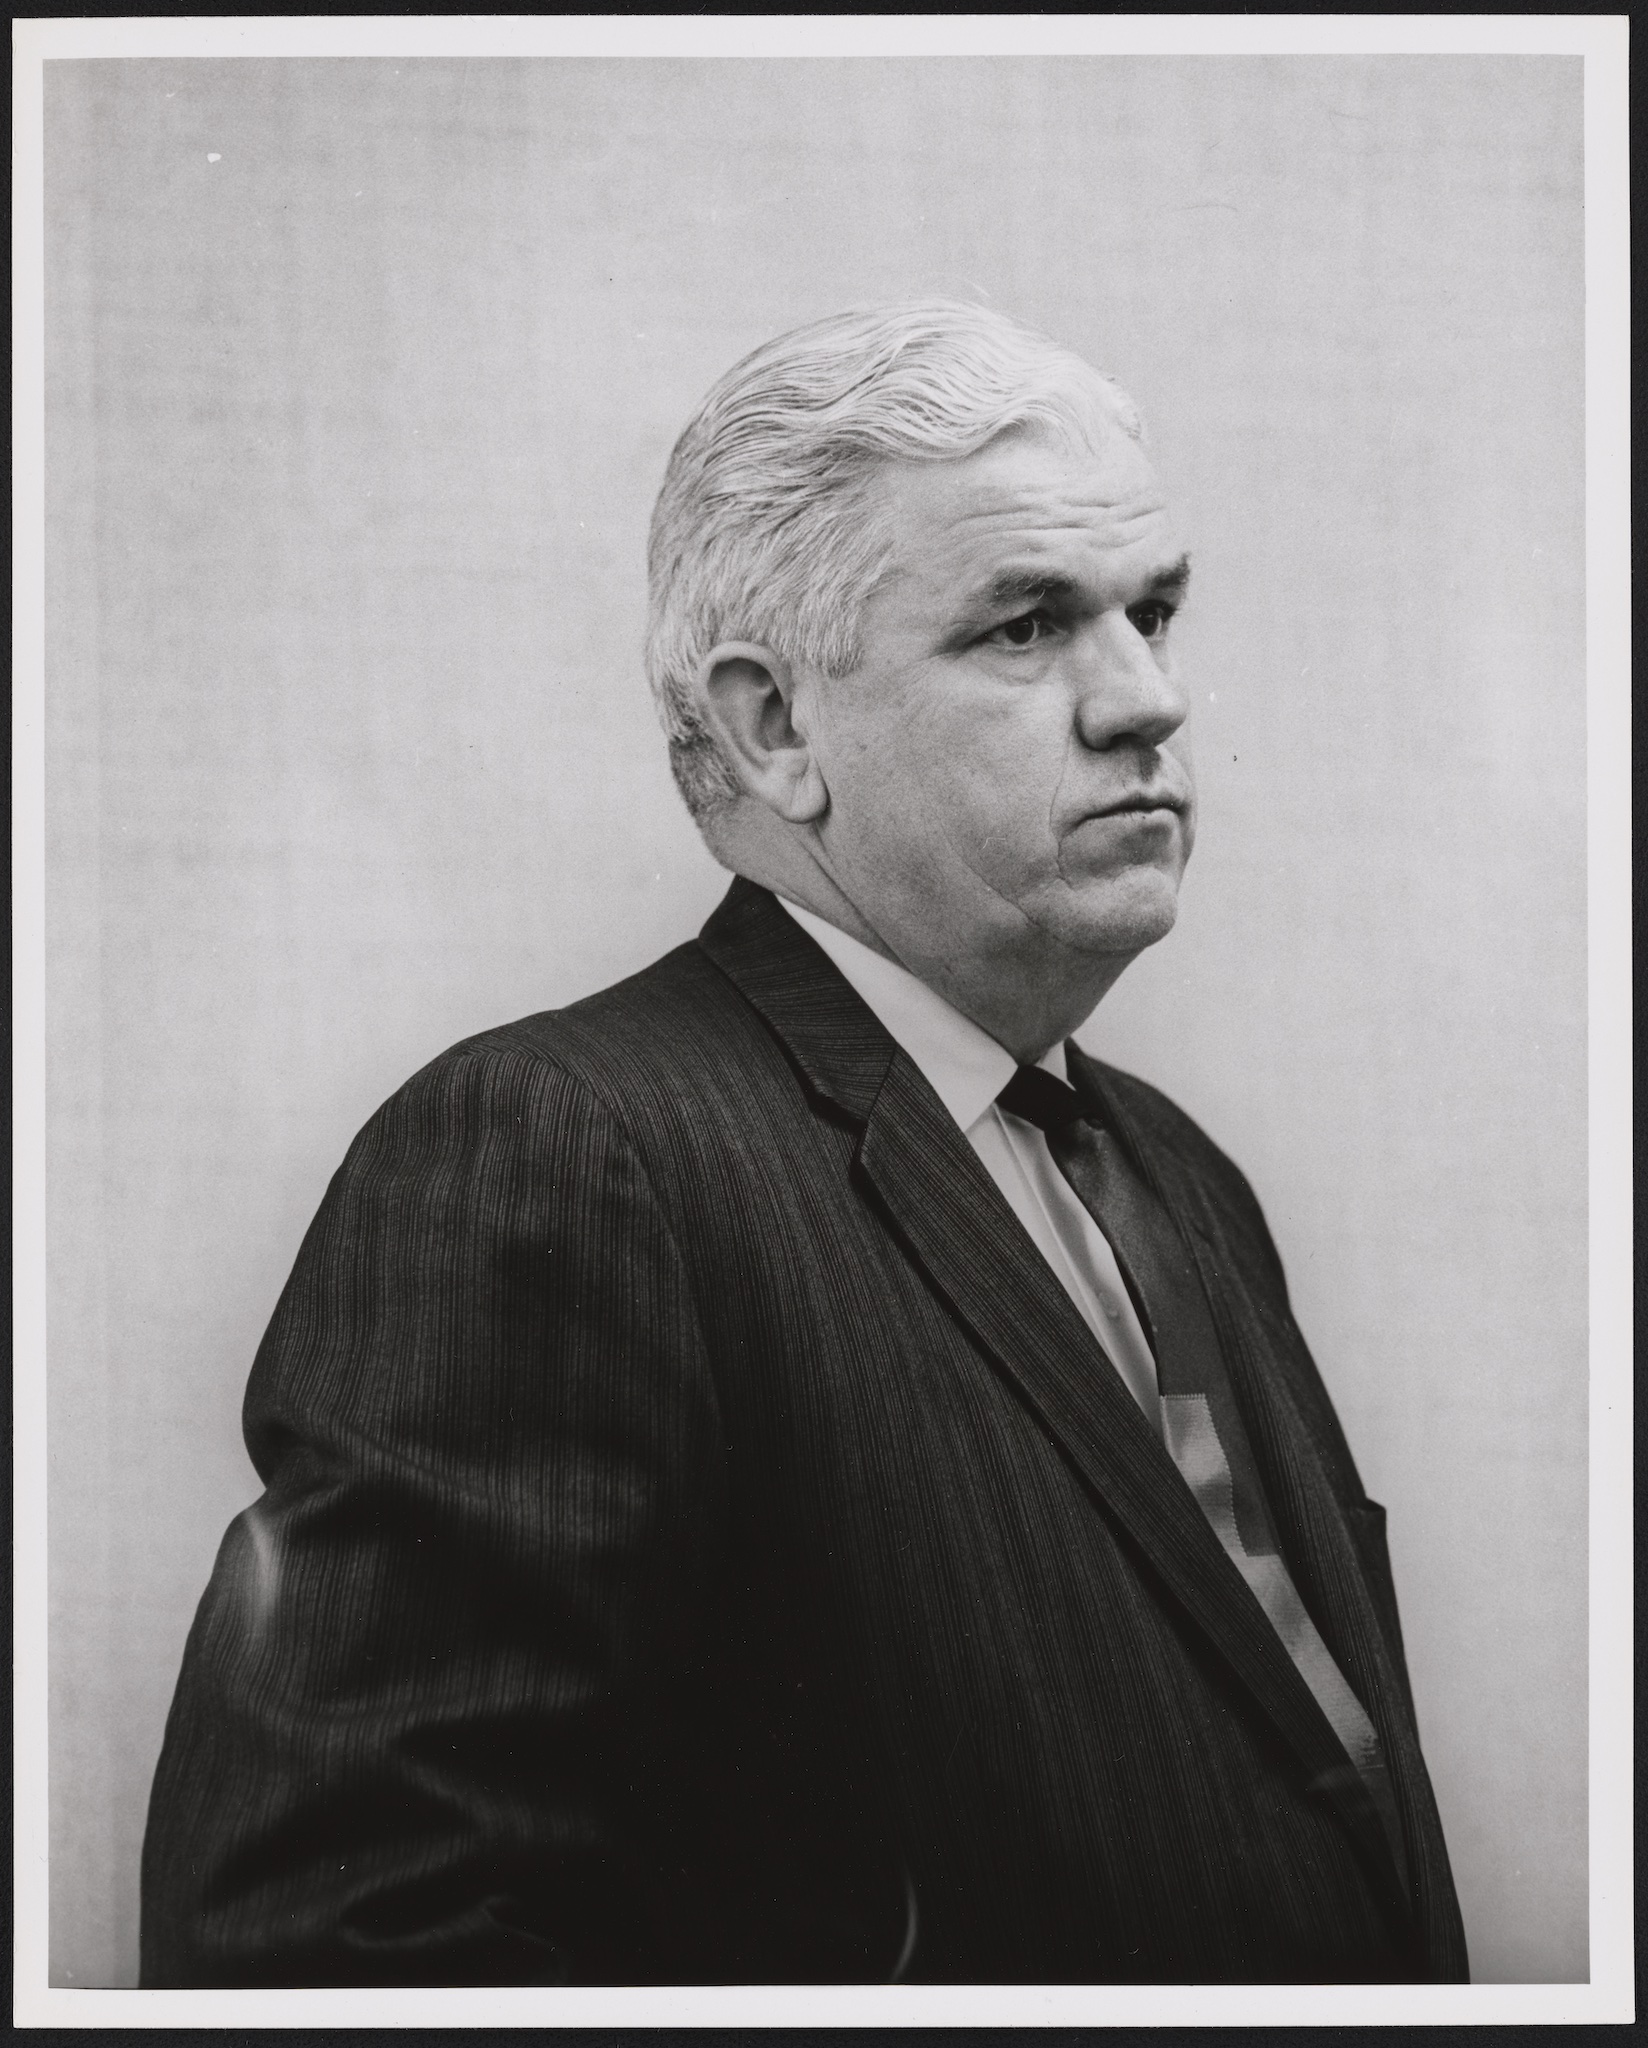 A black and white portrait of famous abortion prosecutor Henry Wade, a white man with gray hair and a round face, looking to the right with a serious expression. He's wearing a traditional suit and tie.